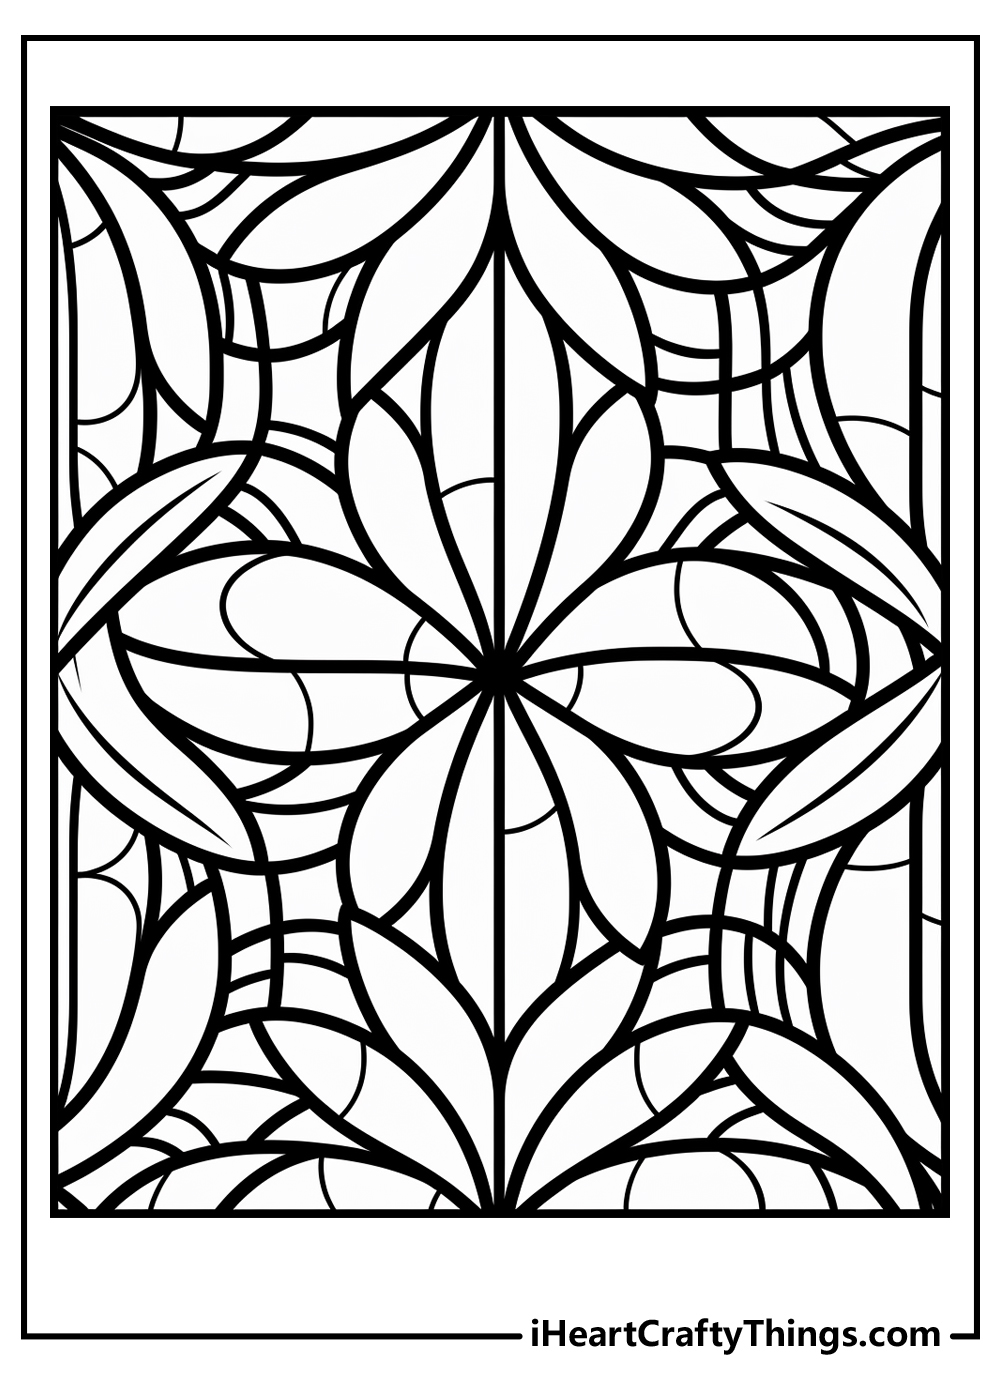 Printable hard coloring pages updated